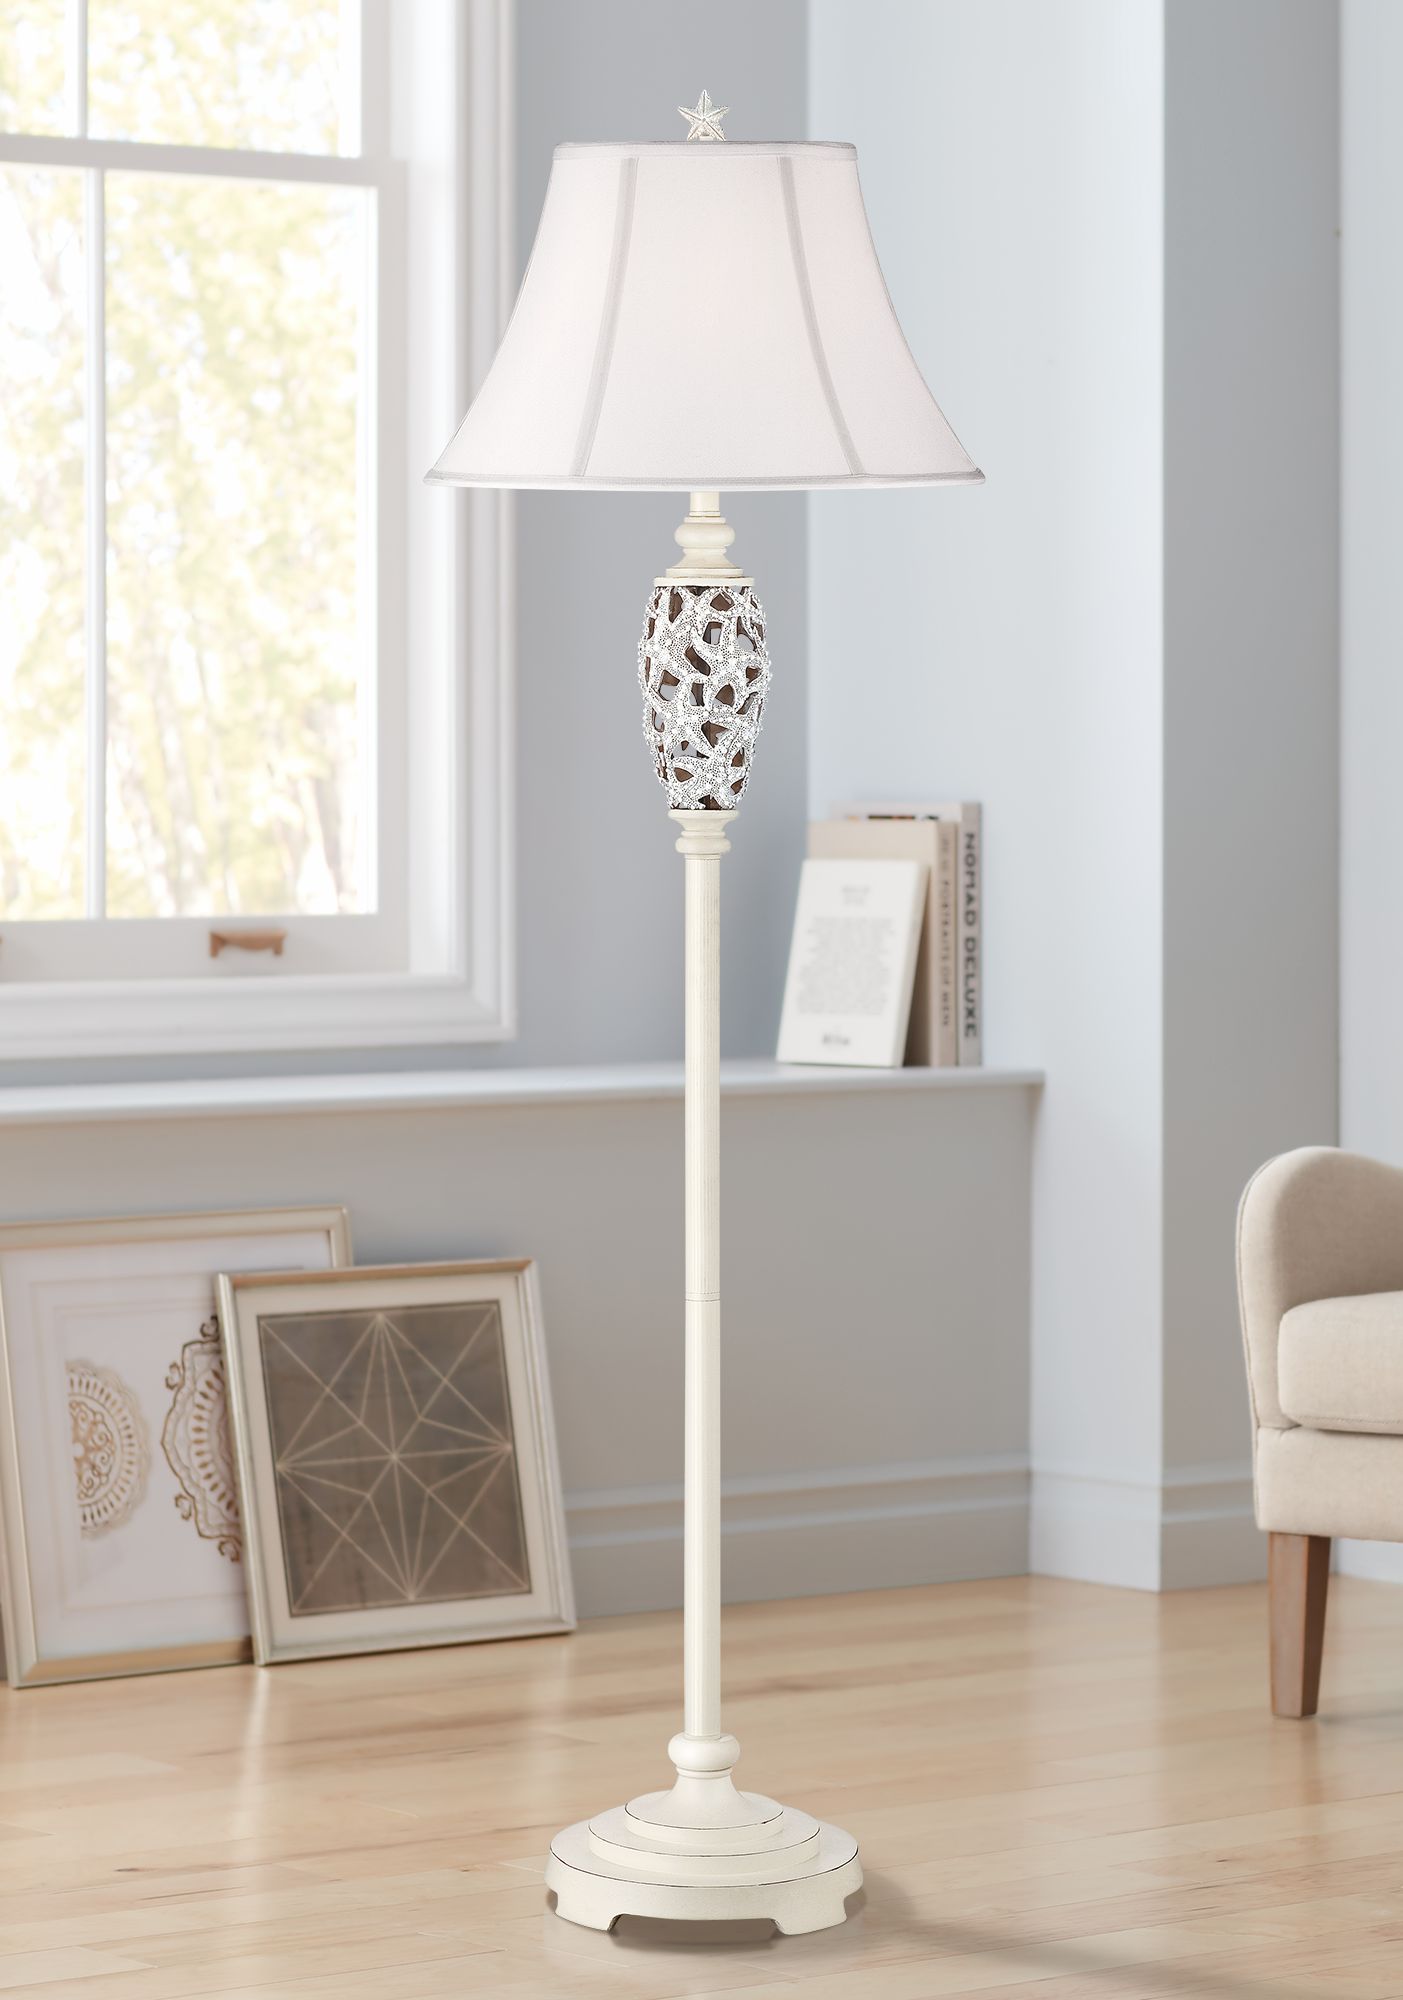 Starfish Antique Floor Lamp with Piped 